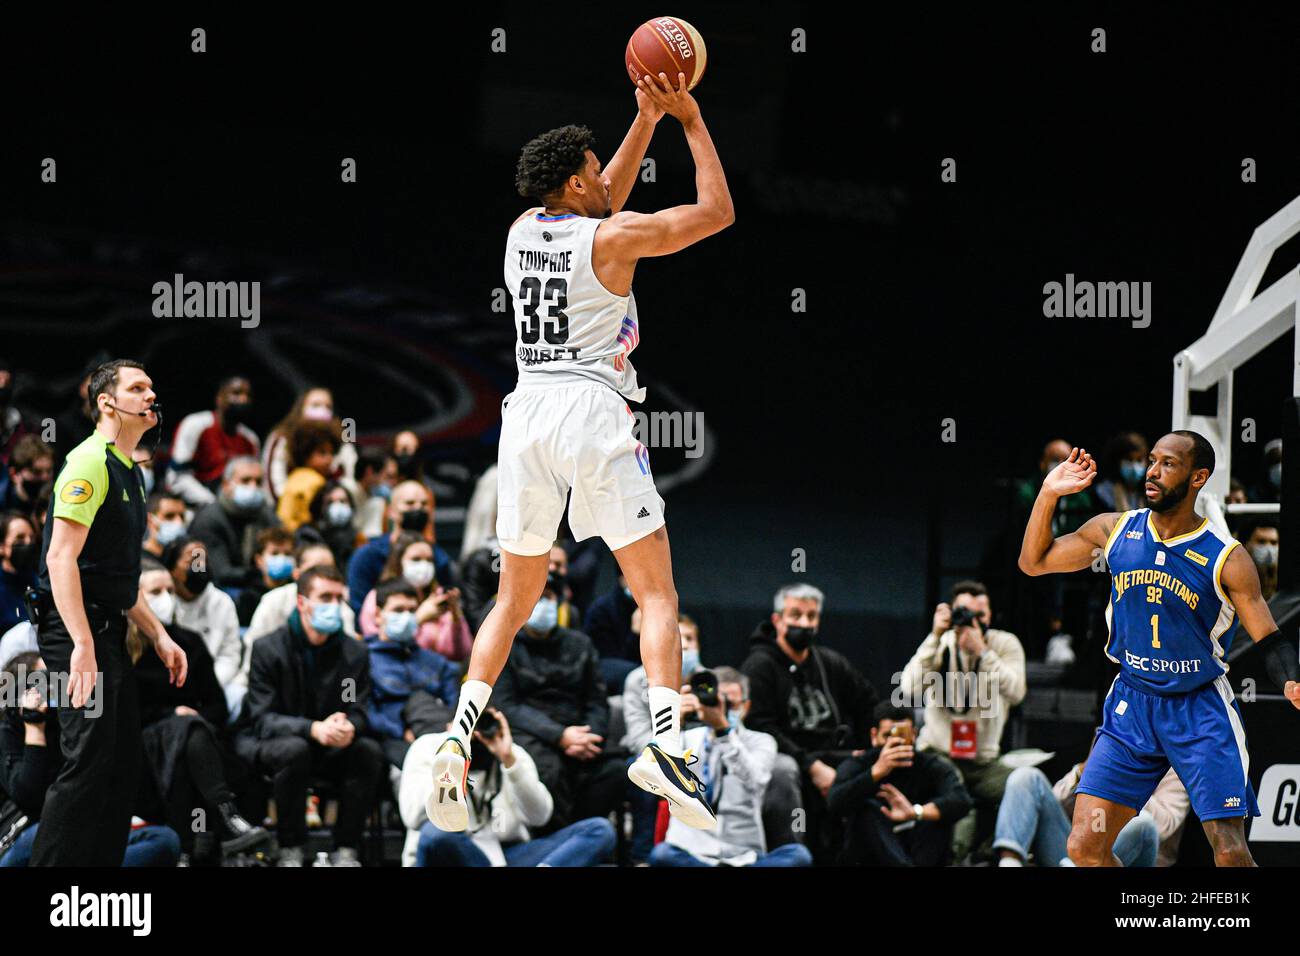 Axel Toupane of Paris Basketball shoots during the French championship,  Betclic Elite Basketball match between Paris Basketball and Metropolitans  92 (Boulogne-Levallois) on January 15, 2022 at Halle Georges Carpentier in  Paris, France.